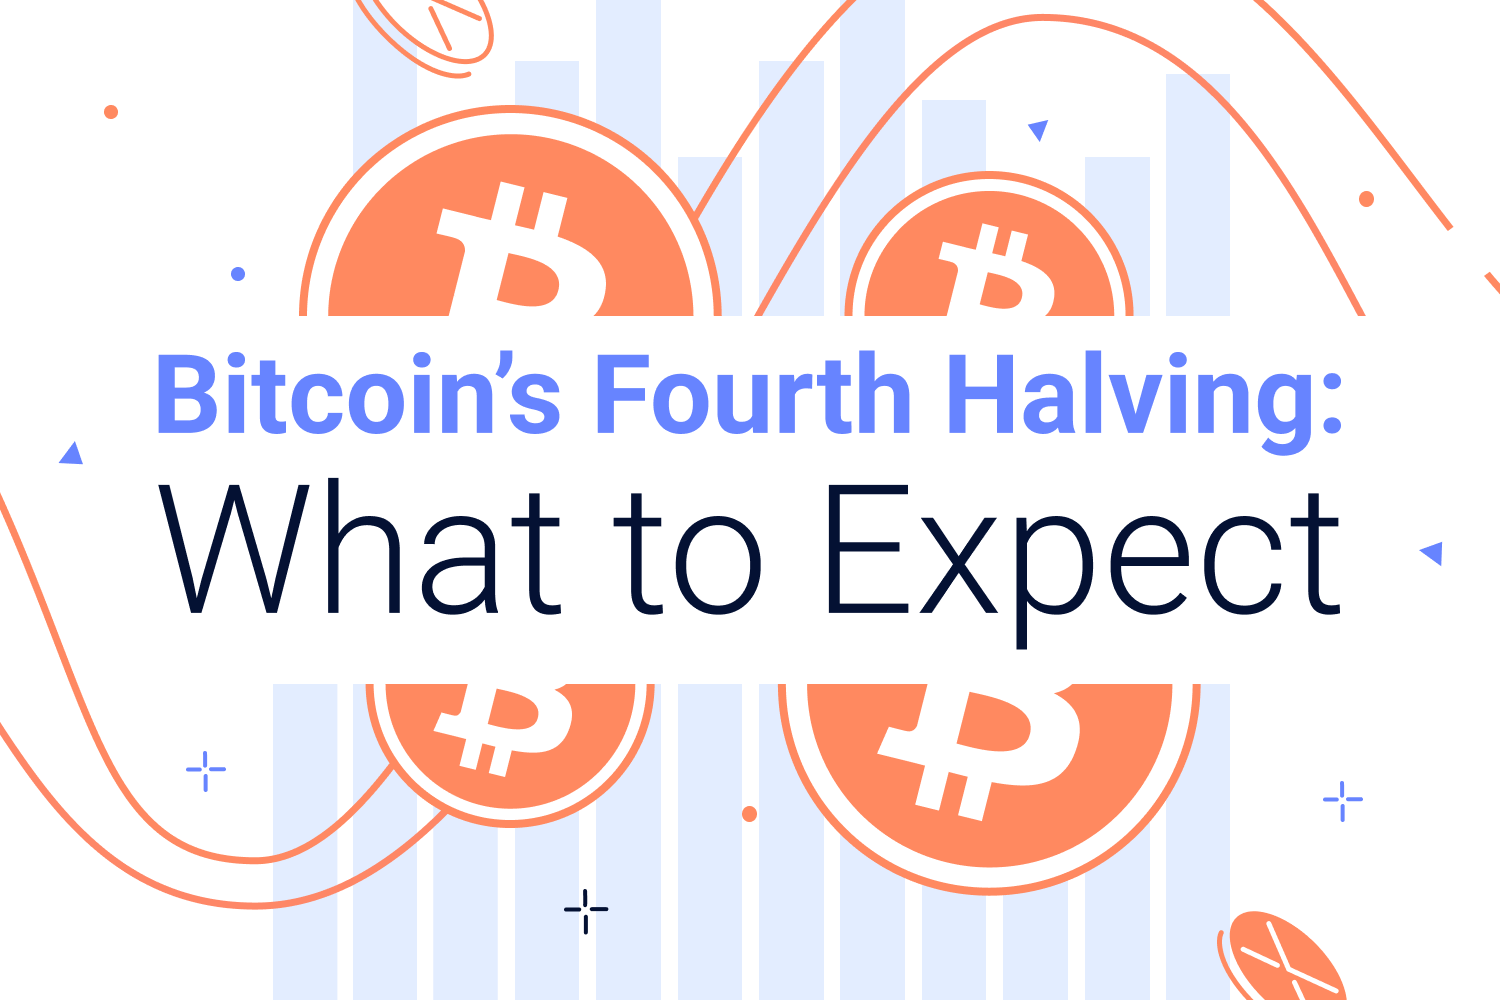 Bitcoin’s Fourth Halving: What To Expect